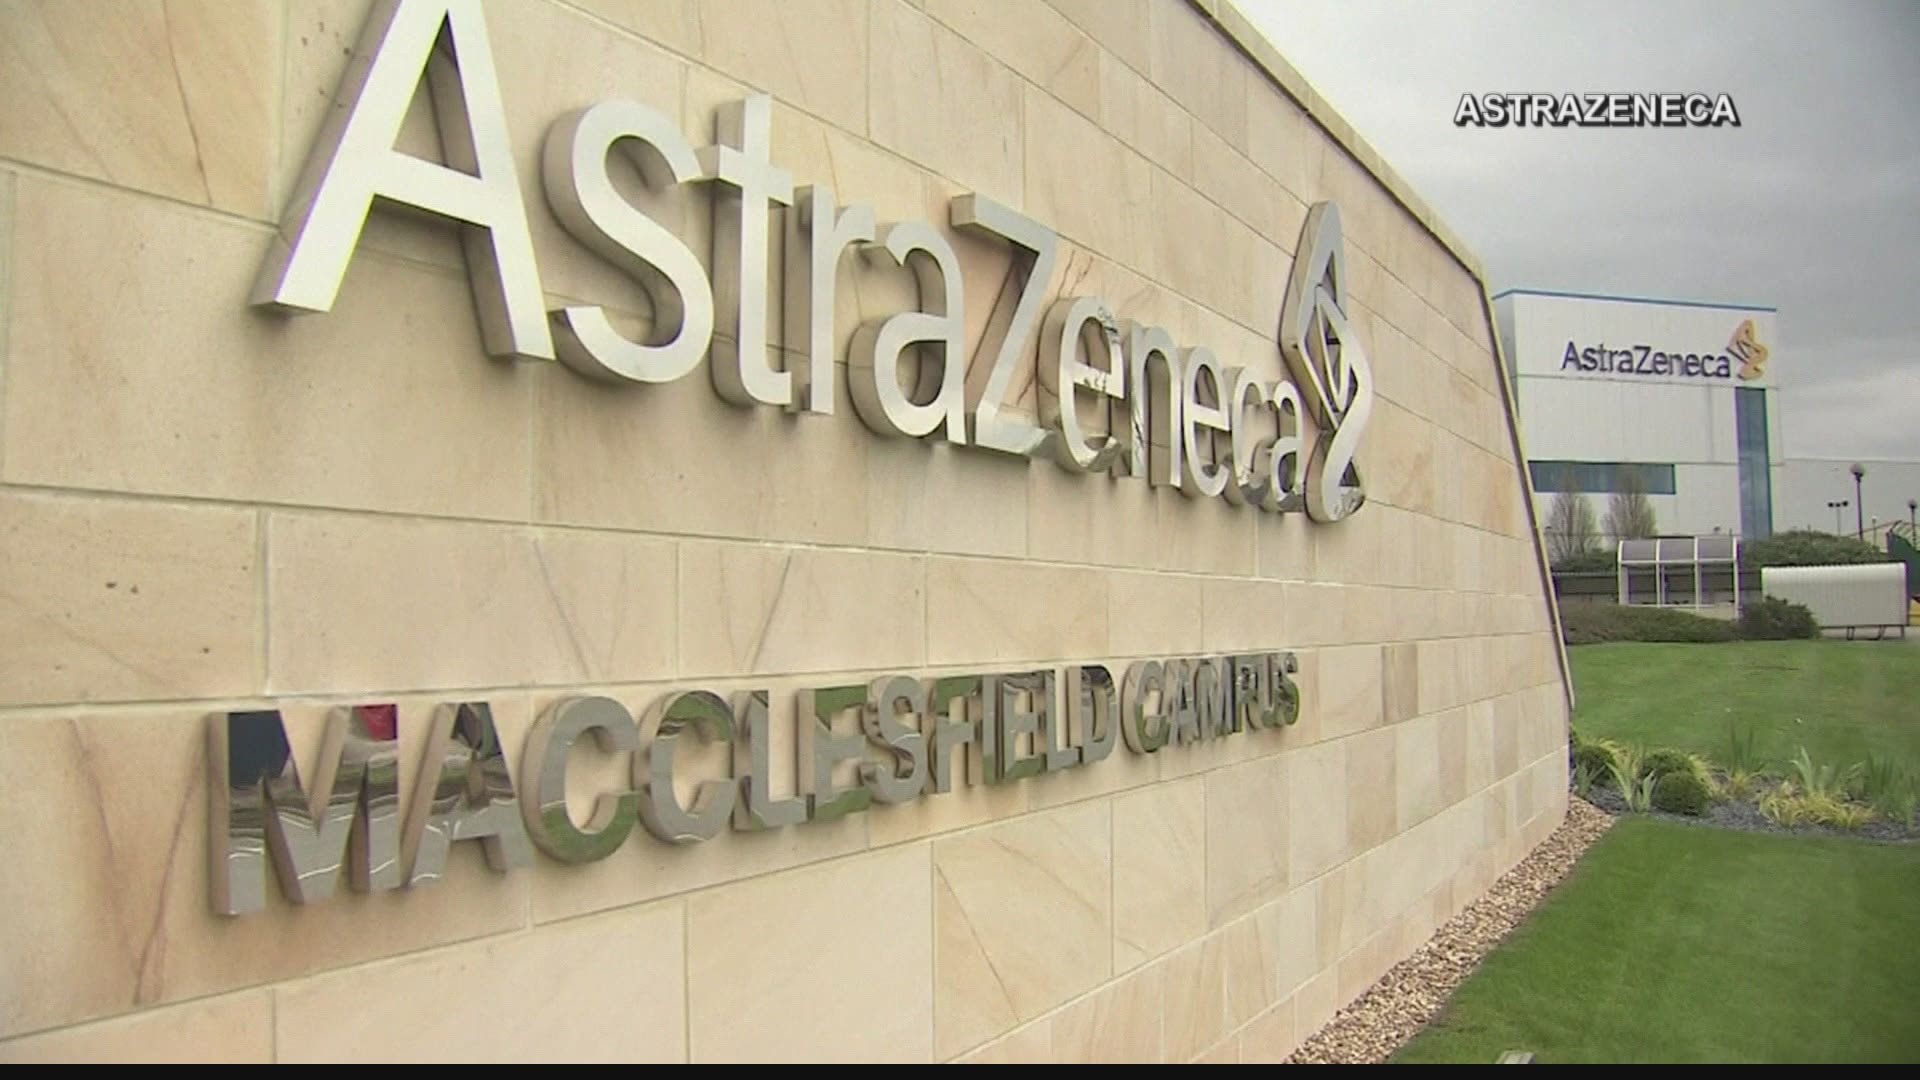 Late-stage studies of AstraZeneca's COVID-19 vaccine candidate are on temporary hold while the company investigates if a report of a patient with a serious side effe